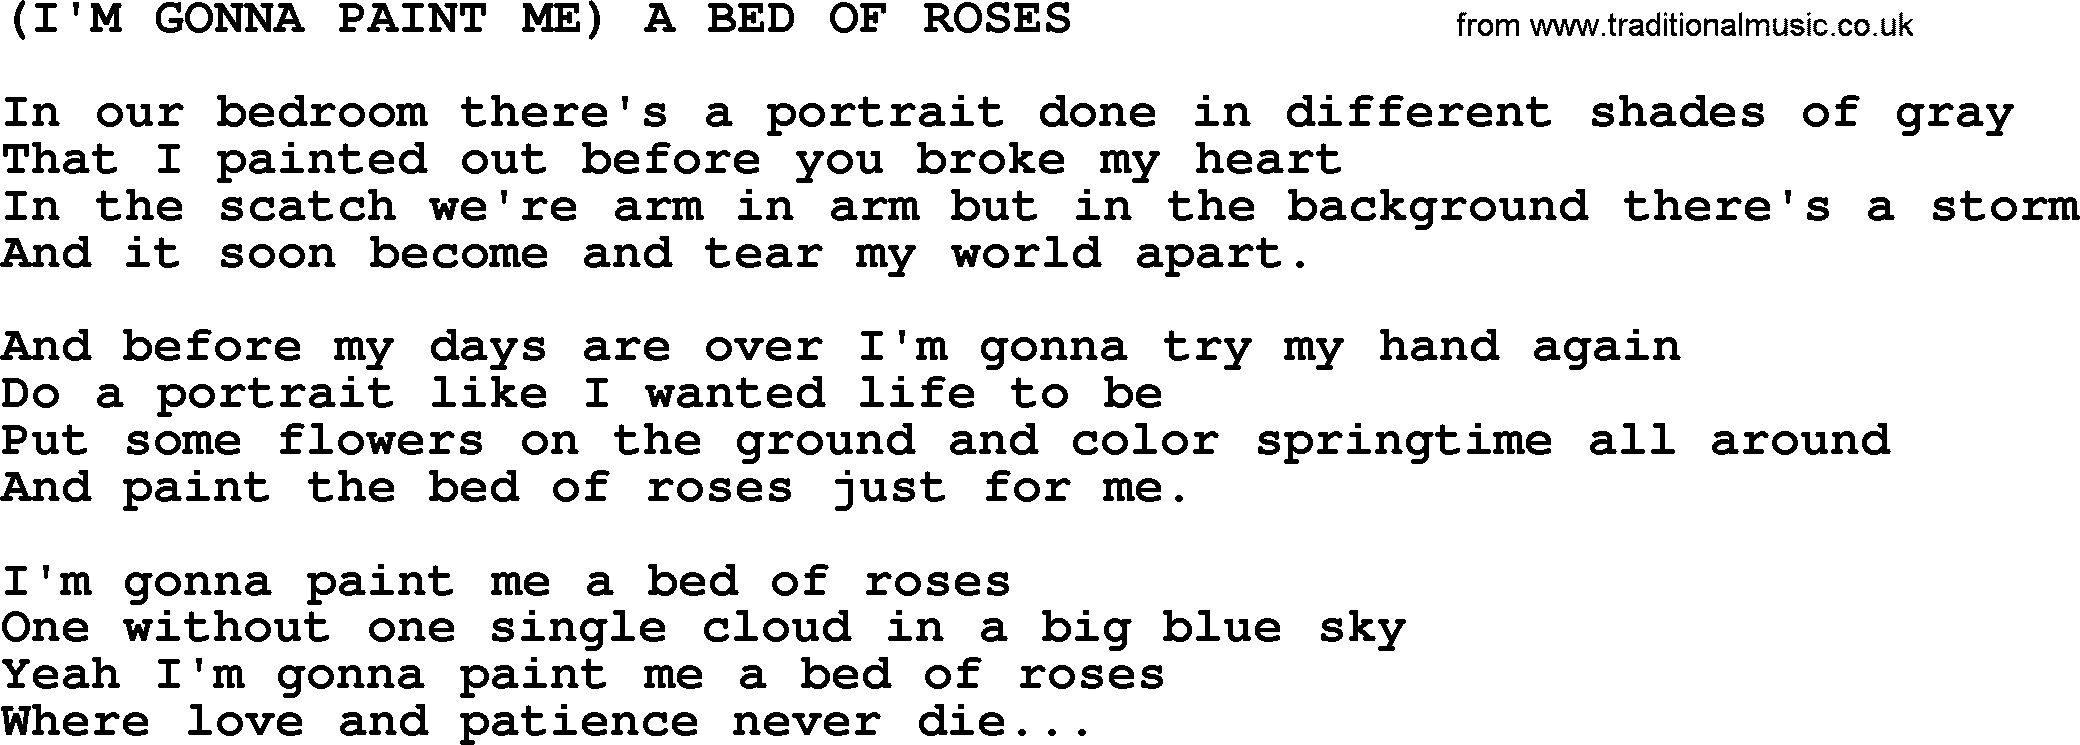 Merle Haggard song: I'm Gonna Paint Me A Bed Of Roses, lyrics.